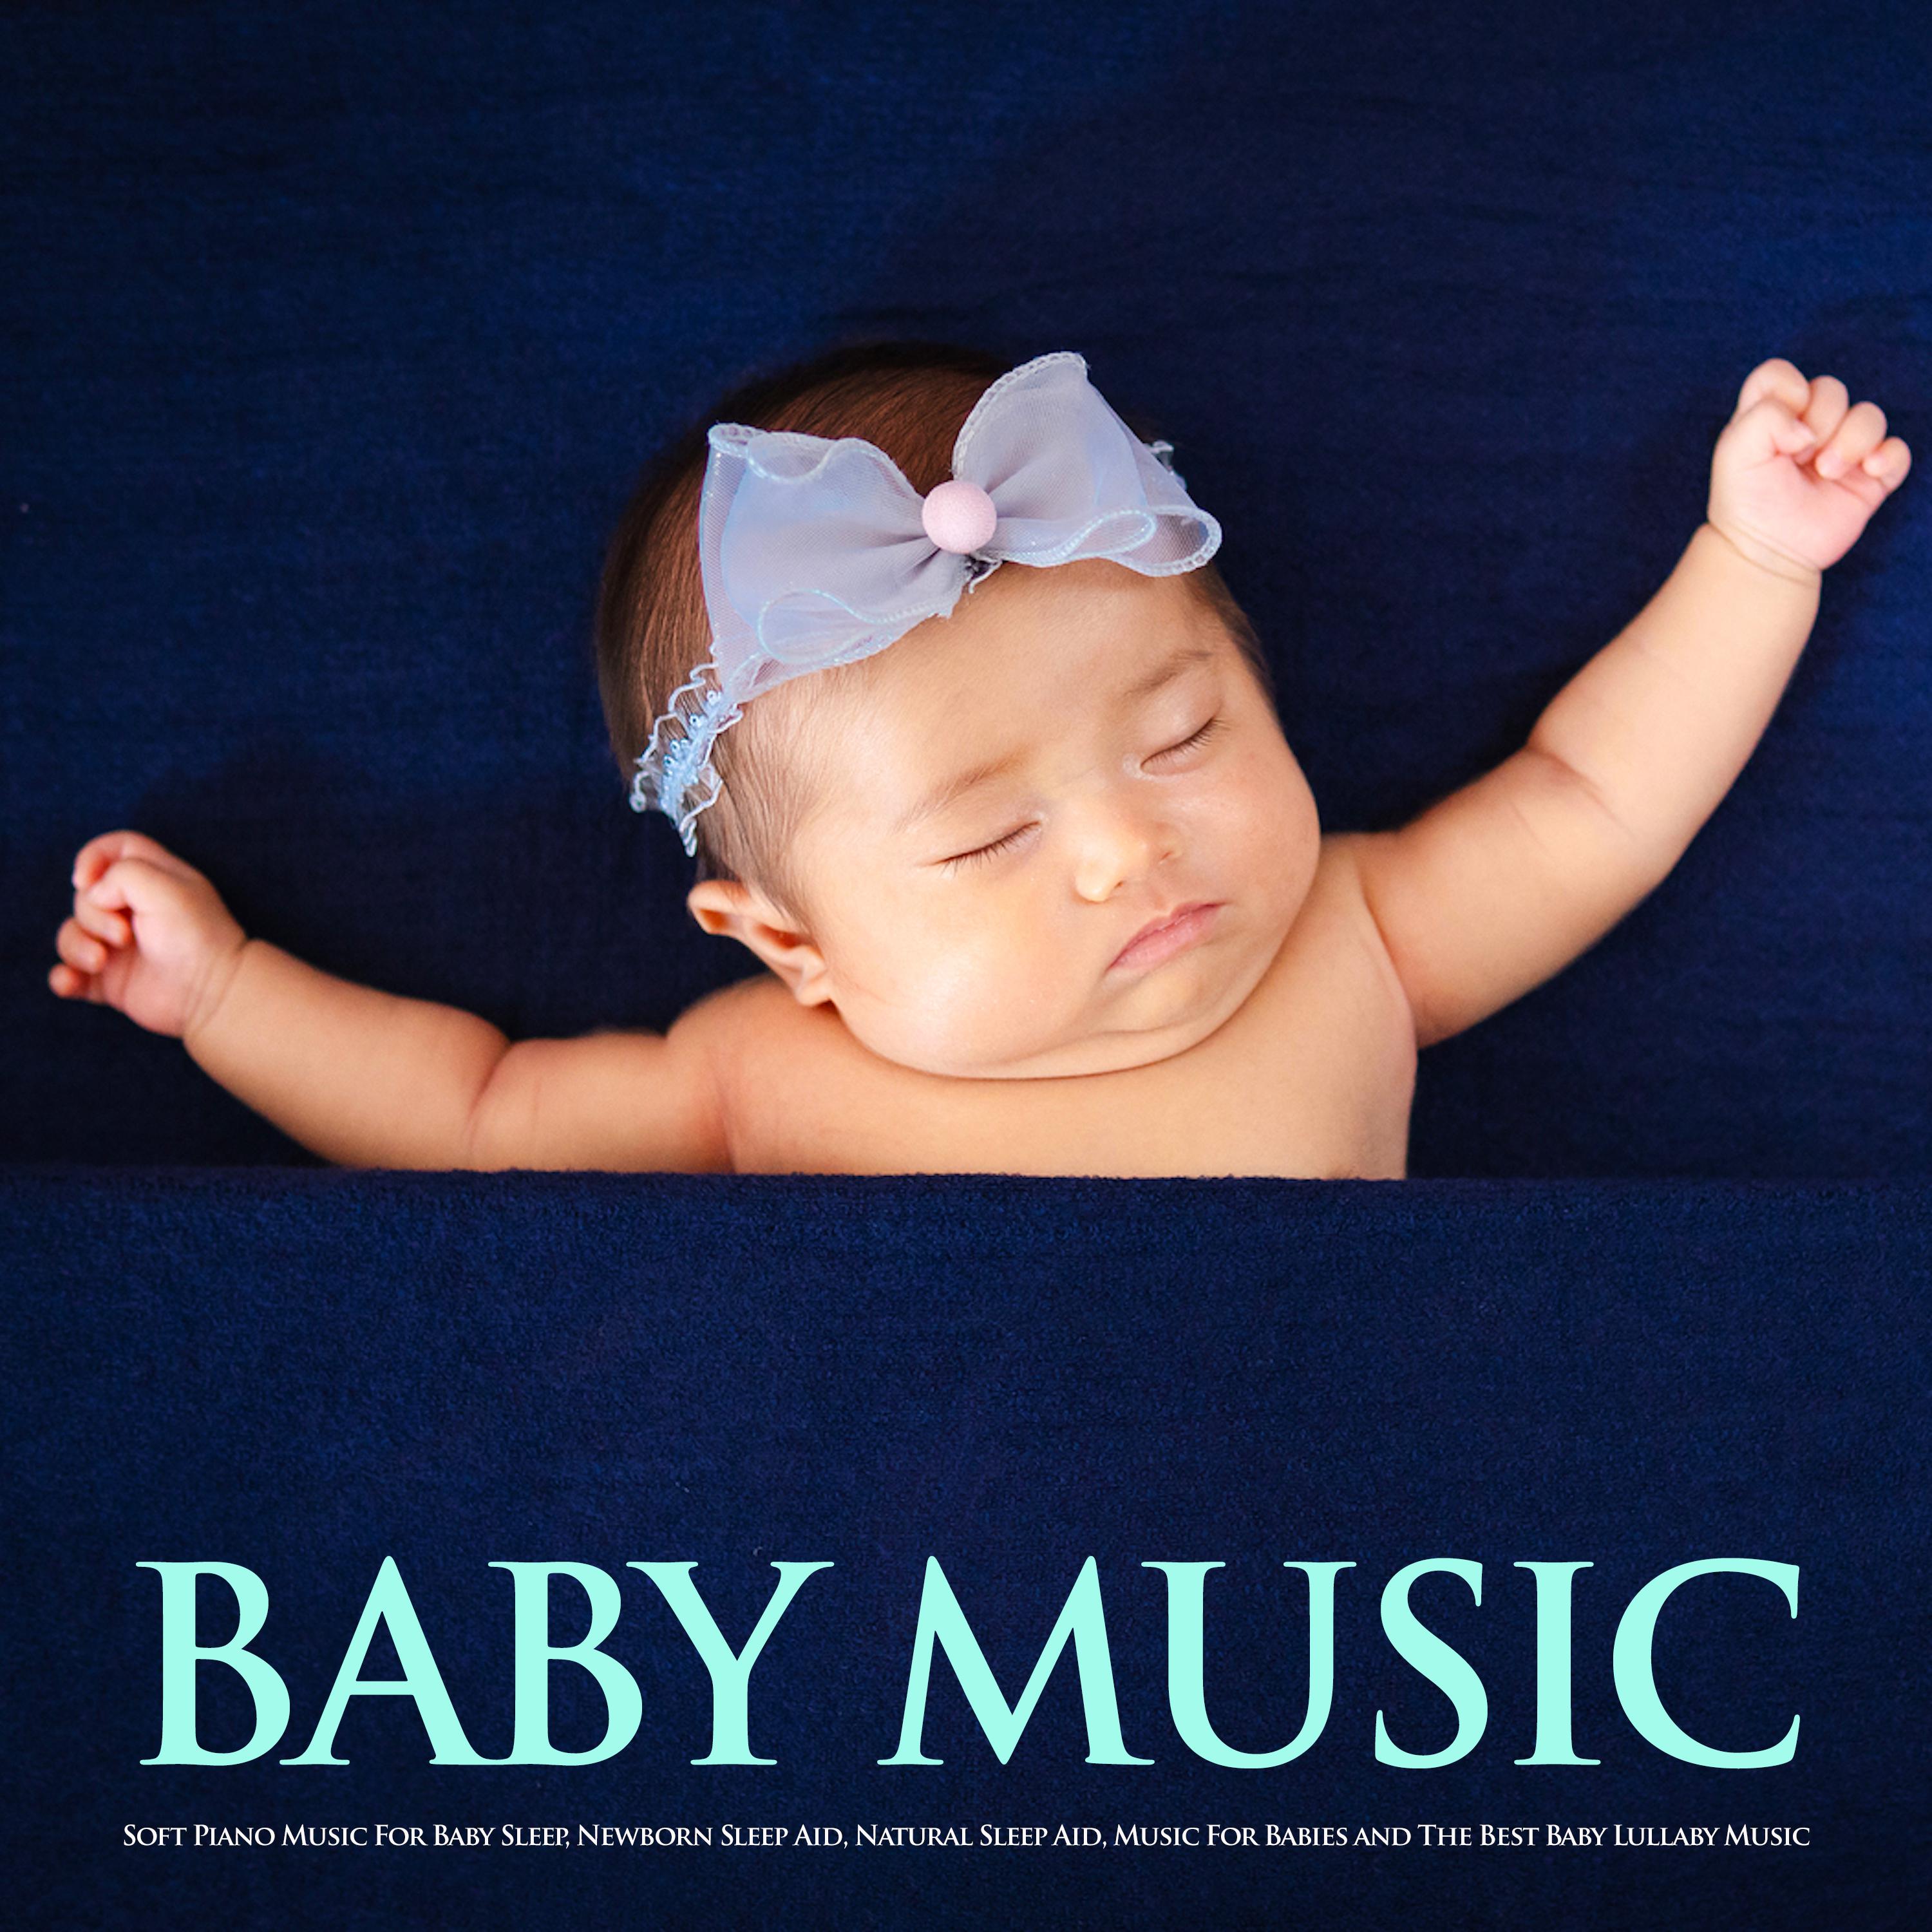 Baby Music: Soft Piano Music For Baby Sleep, Newborn Sleep Aid, Natural Sleep Aid, Music For Babies and The Best Baby Lullaby Music